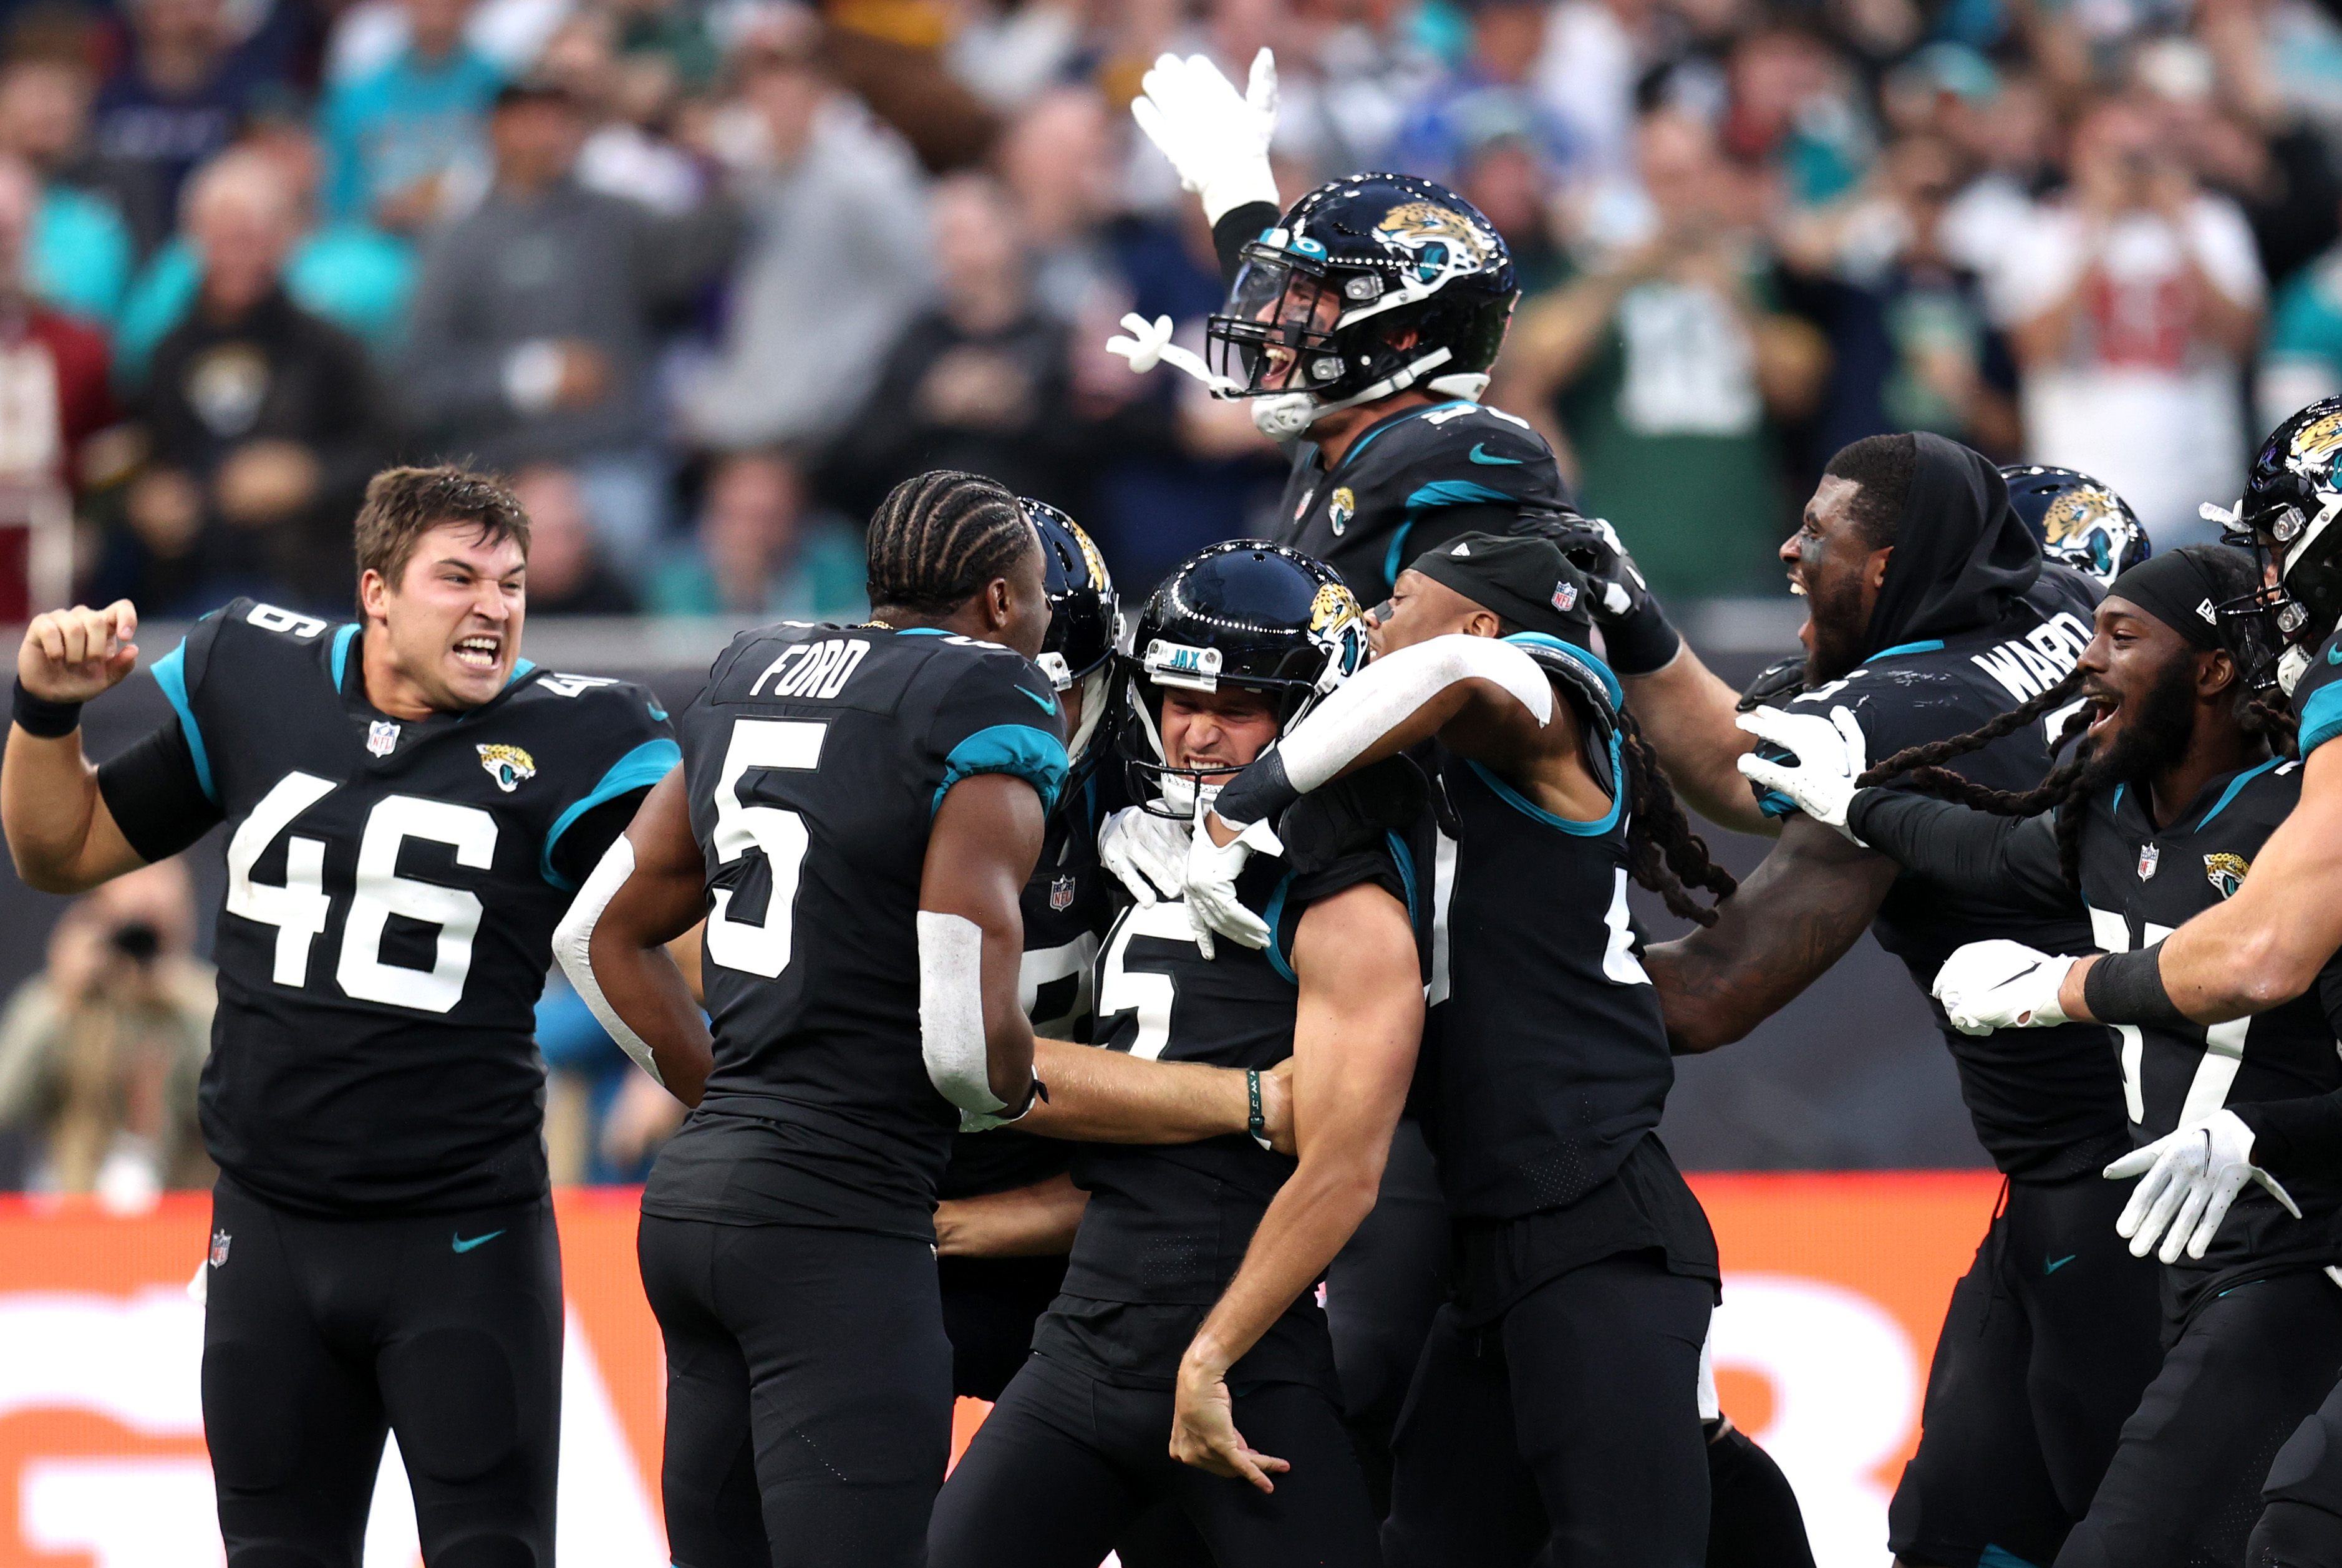 The Jaguars beat the Dolphins in London as Urban Meyer got his first victory.